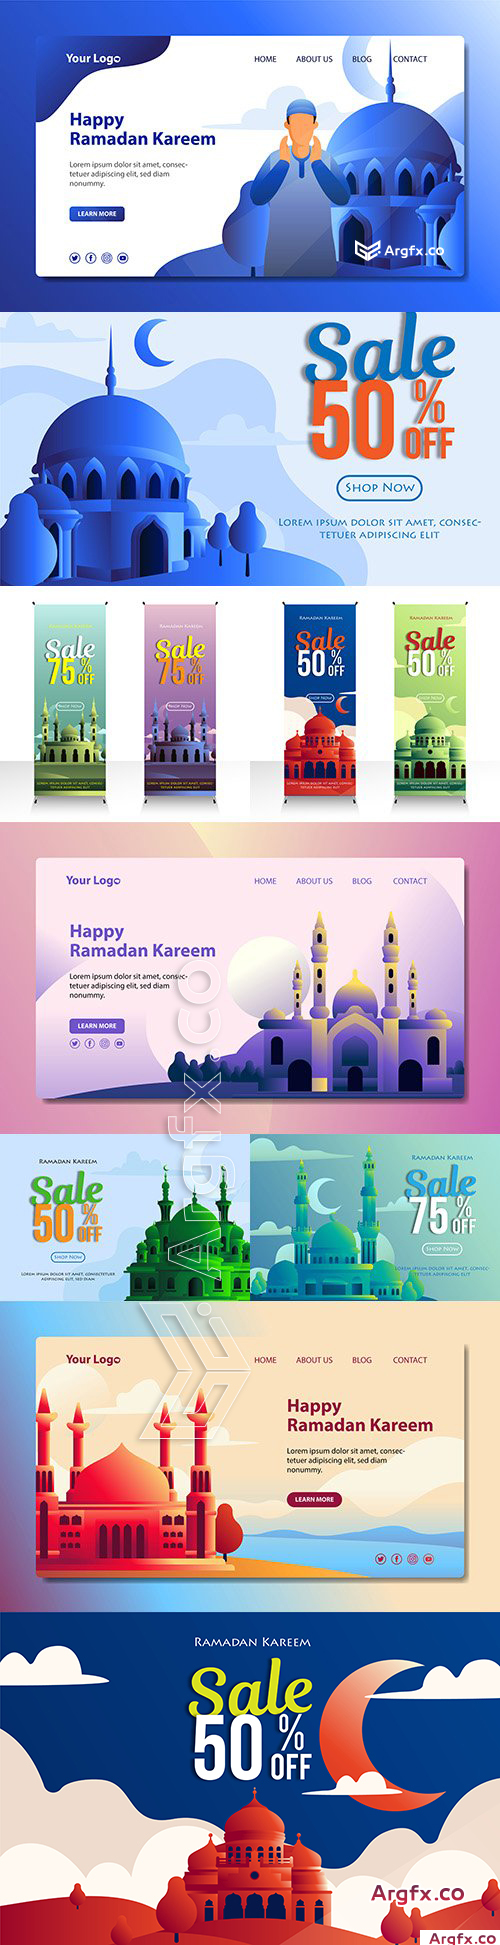 Ramadan sales and landing page mosque illustration